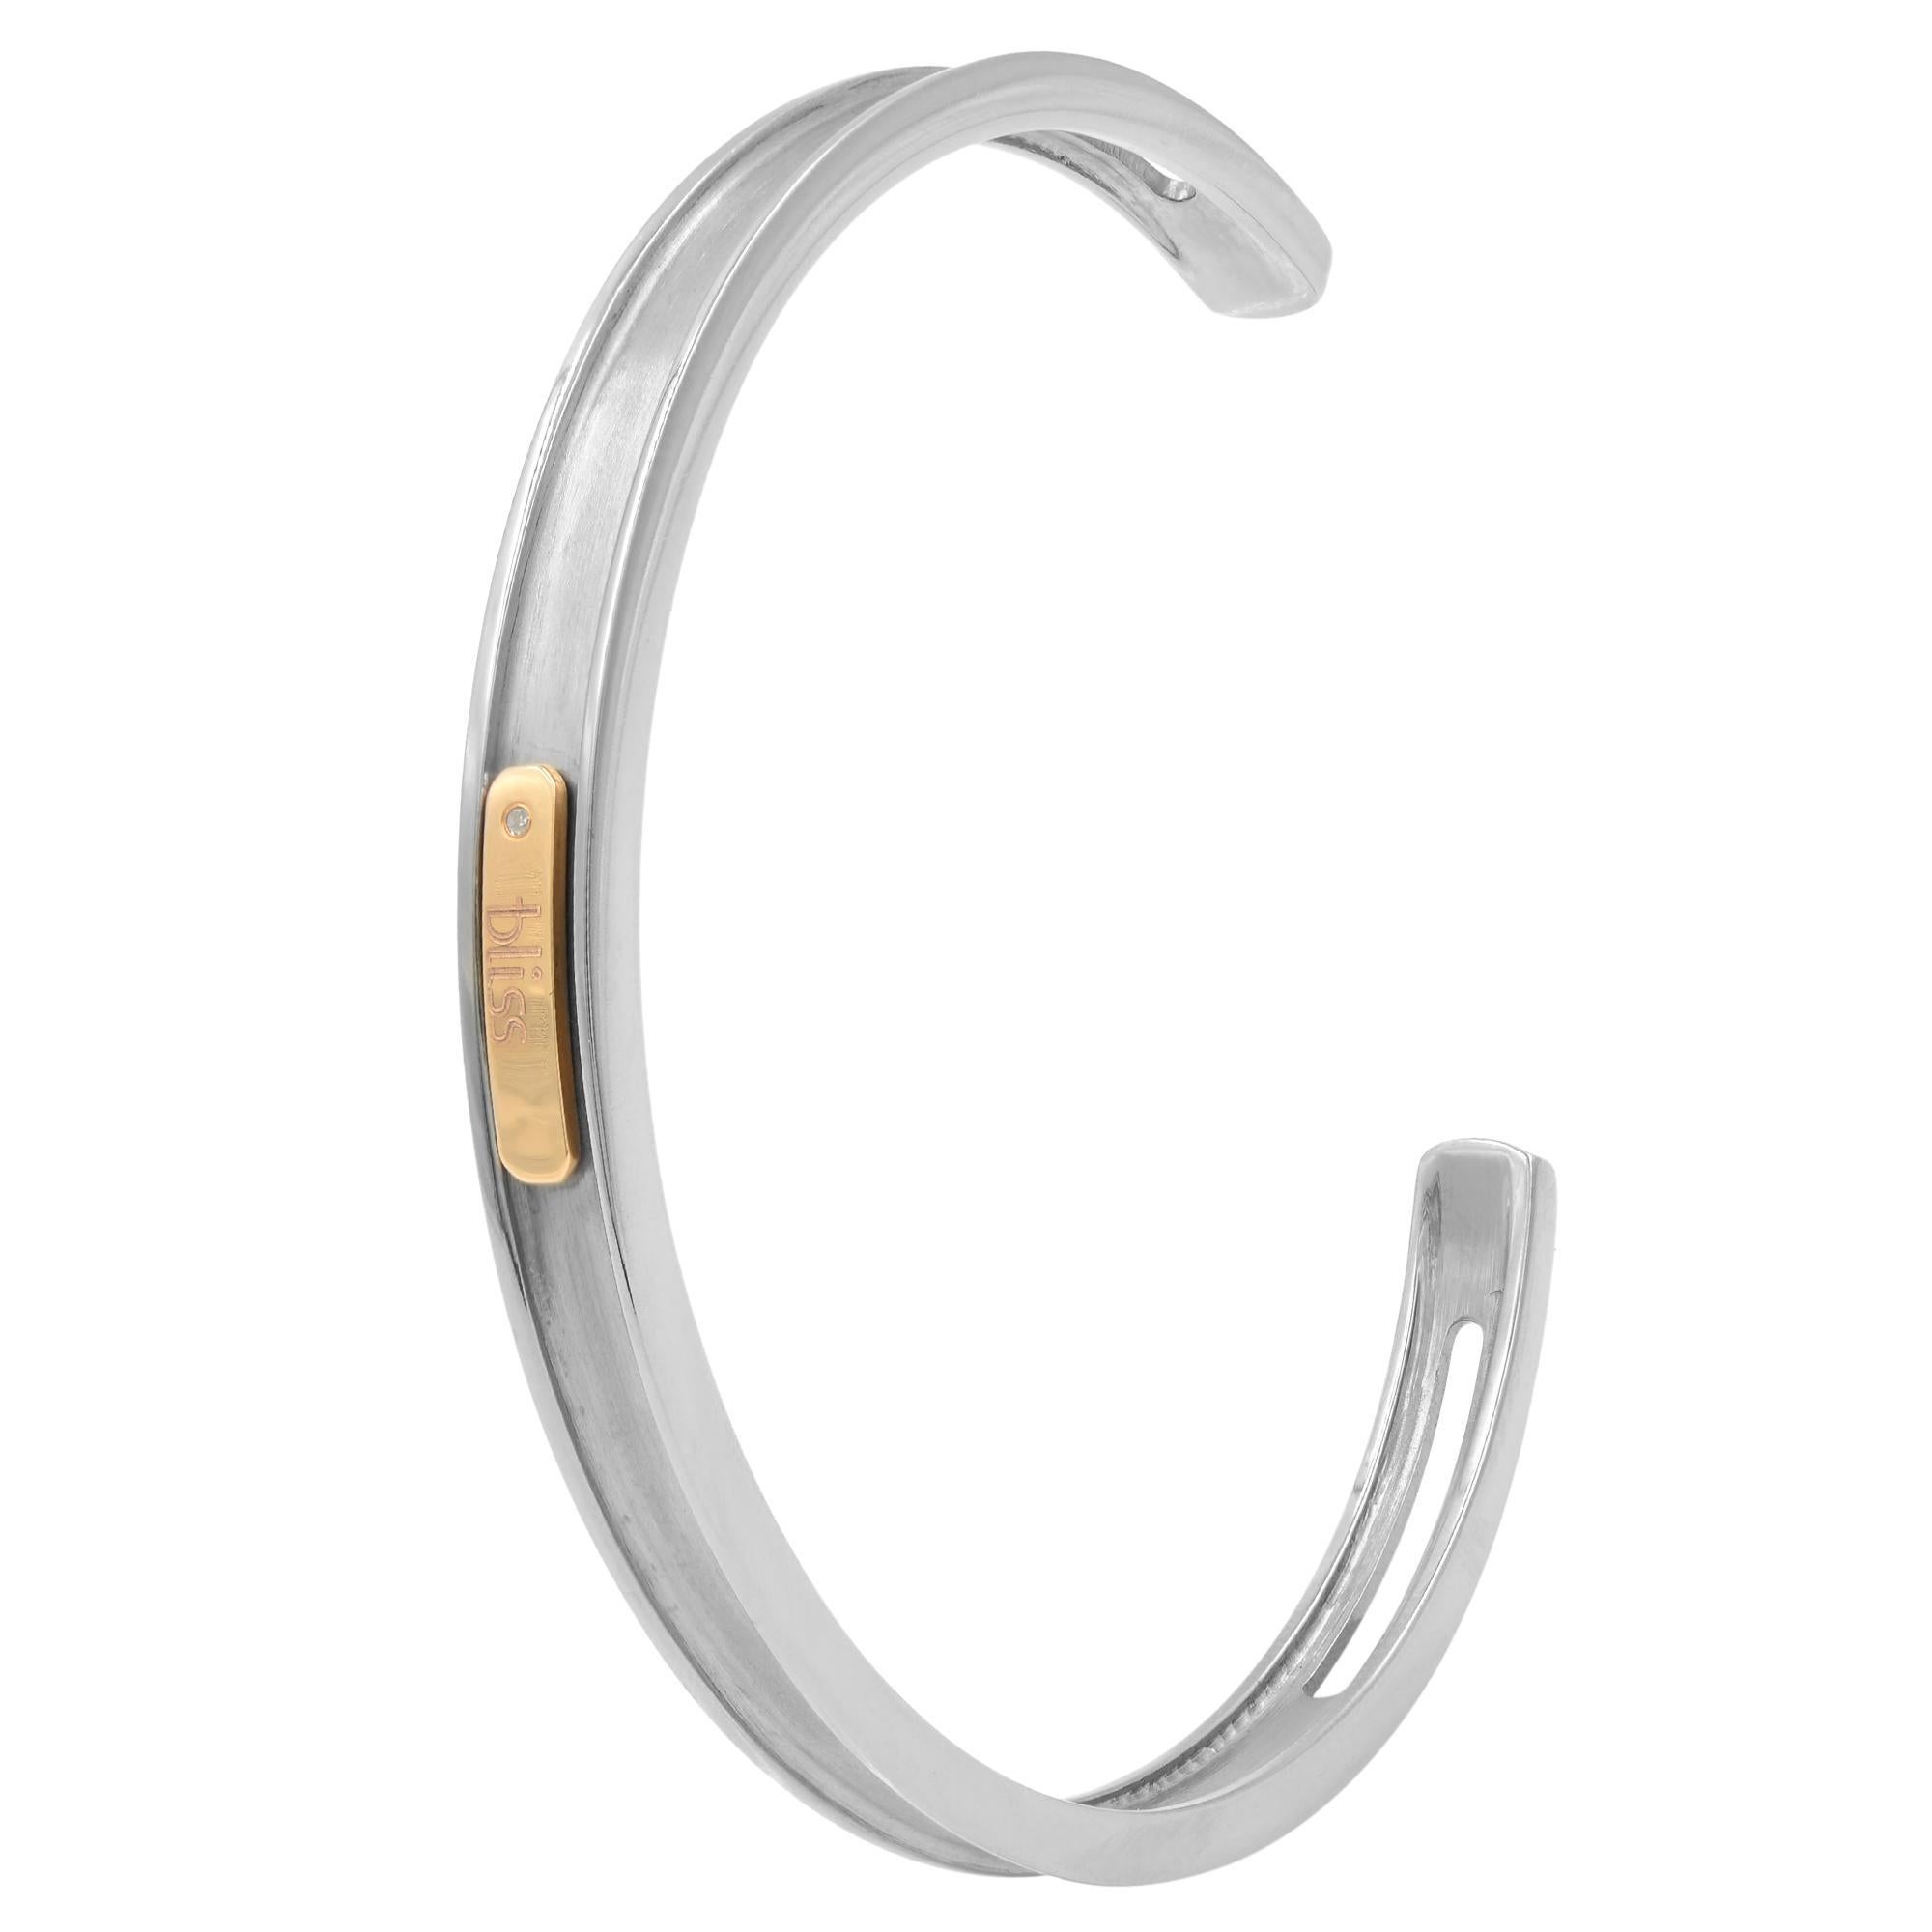 Celebrating the uniqueness, BLISS by Damiani Unisex Cuff Bracelet Bangle crafted in Gold Tytanium with 18K rose gold and flush set diamond. Inspired by the contemporary vision and traditional beauty, this bracelet features a Logo-engraved bar